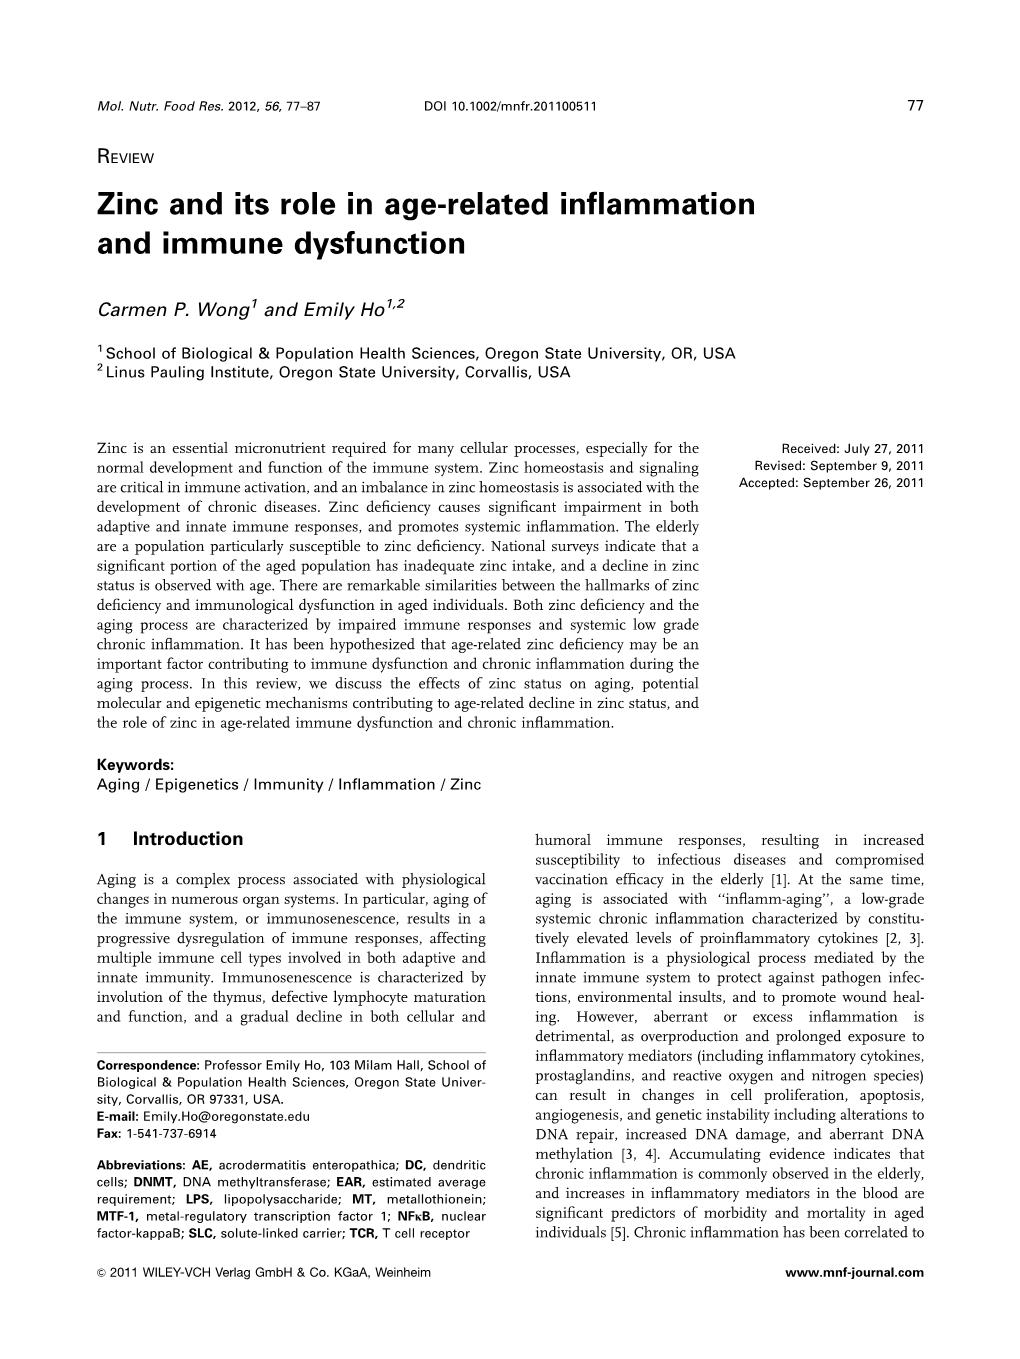 Zinc and Its Role in Agerelated Inflammation and Immune Dysfunction